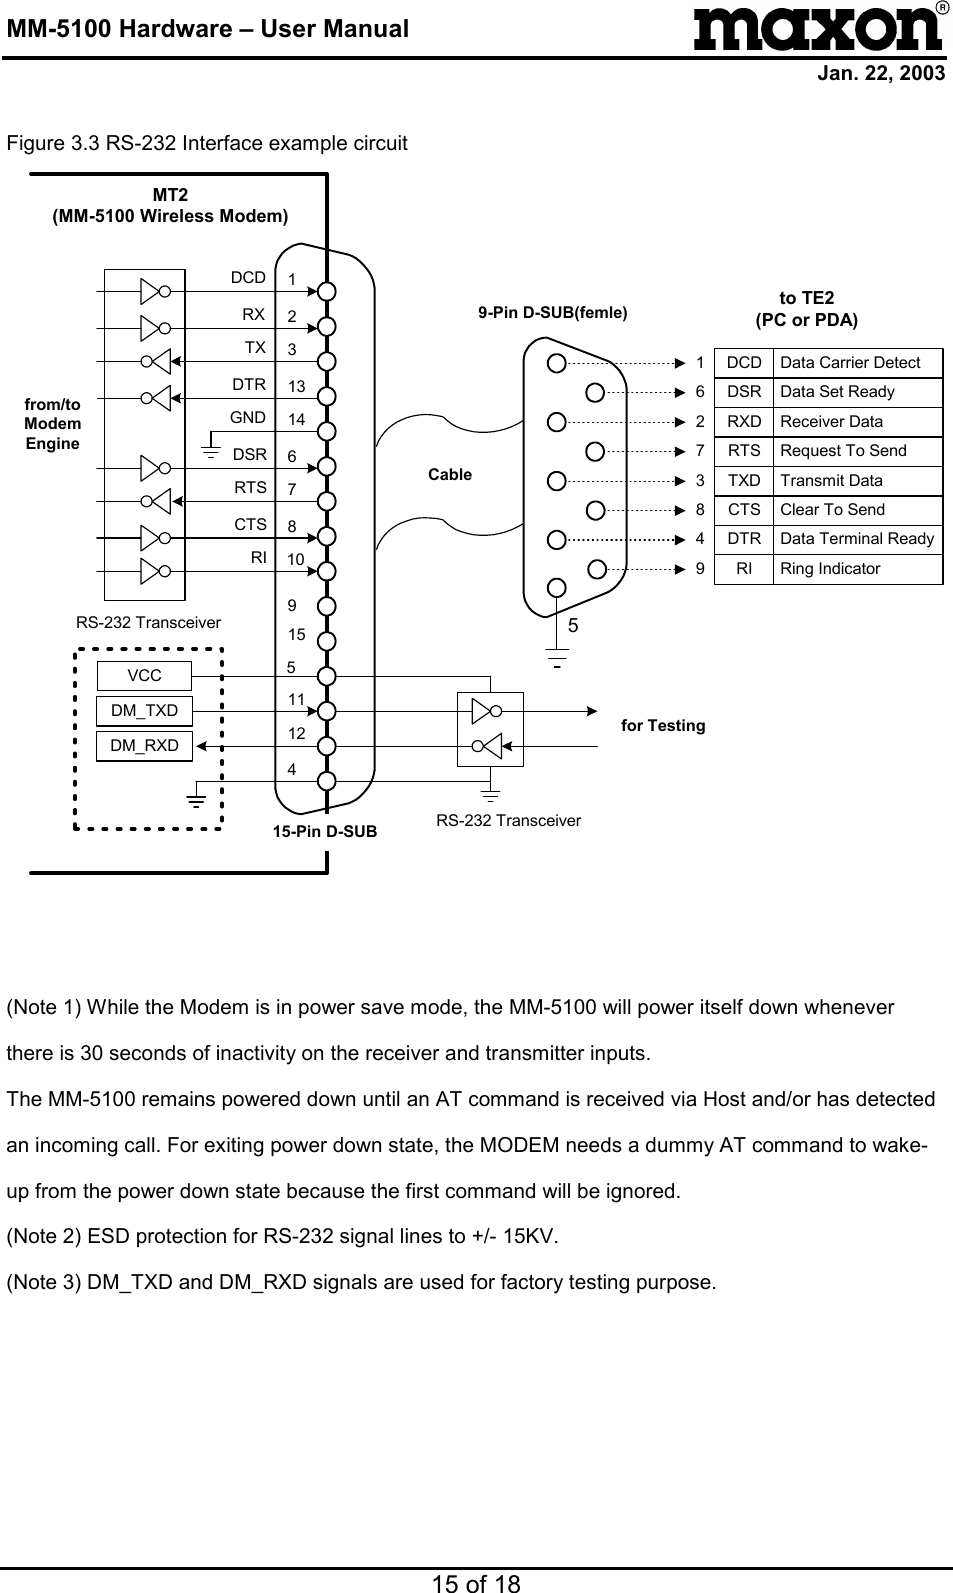 MM-5100 Hardware – User Manual Jan. 22, 2003 15 of 18 Figure 3.3 RS-232 Interface example circuit  for Testing116810MT2(MM-5100 Wireless Modem)5RS-232 Transceiverto TE2(PC or PDA)9-Pin D-SUB(femle)DM_RXDDM_TXD1DCD Data Carrier Detect4DTR Data Terminal Ready8CTS Clear To Send3TXD Transmit Data7RTS Request To Send2RXD Receiver Data6DSR Data Set Ready9RI Ring Indicator15-Pin D-SUBDCDRXTXDTRGNDDSRRTSCTSRI123131471245159VCCCableRS-232 Transceiverfrom/toModemEngine  (Note 1) While the Modem is in power save mode, the MM-5100 will power itself down whenever there is 30 seconds of inactivity on the receiver and transmitter inputs. The MM-5100 remains powered down until an AT command is received via Host and/or has detected an incoming call. For exiting power down state, the MODEM needs a dummy AT command to wake-up from the power down state because the first command will be ignored. (Note 2) ESD protection for RS-232 signal lines to +/- 15KV. (Note 3) DM_TXD and DM_RXD signals are used for factory testing purpose.   